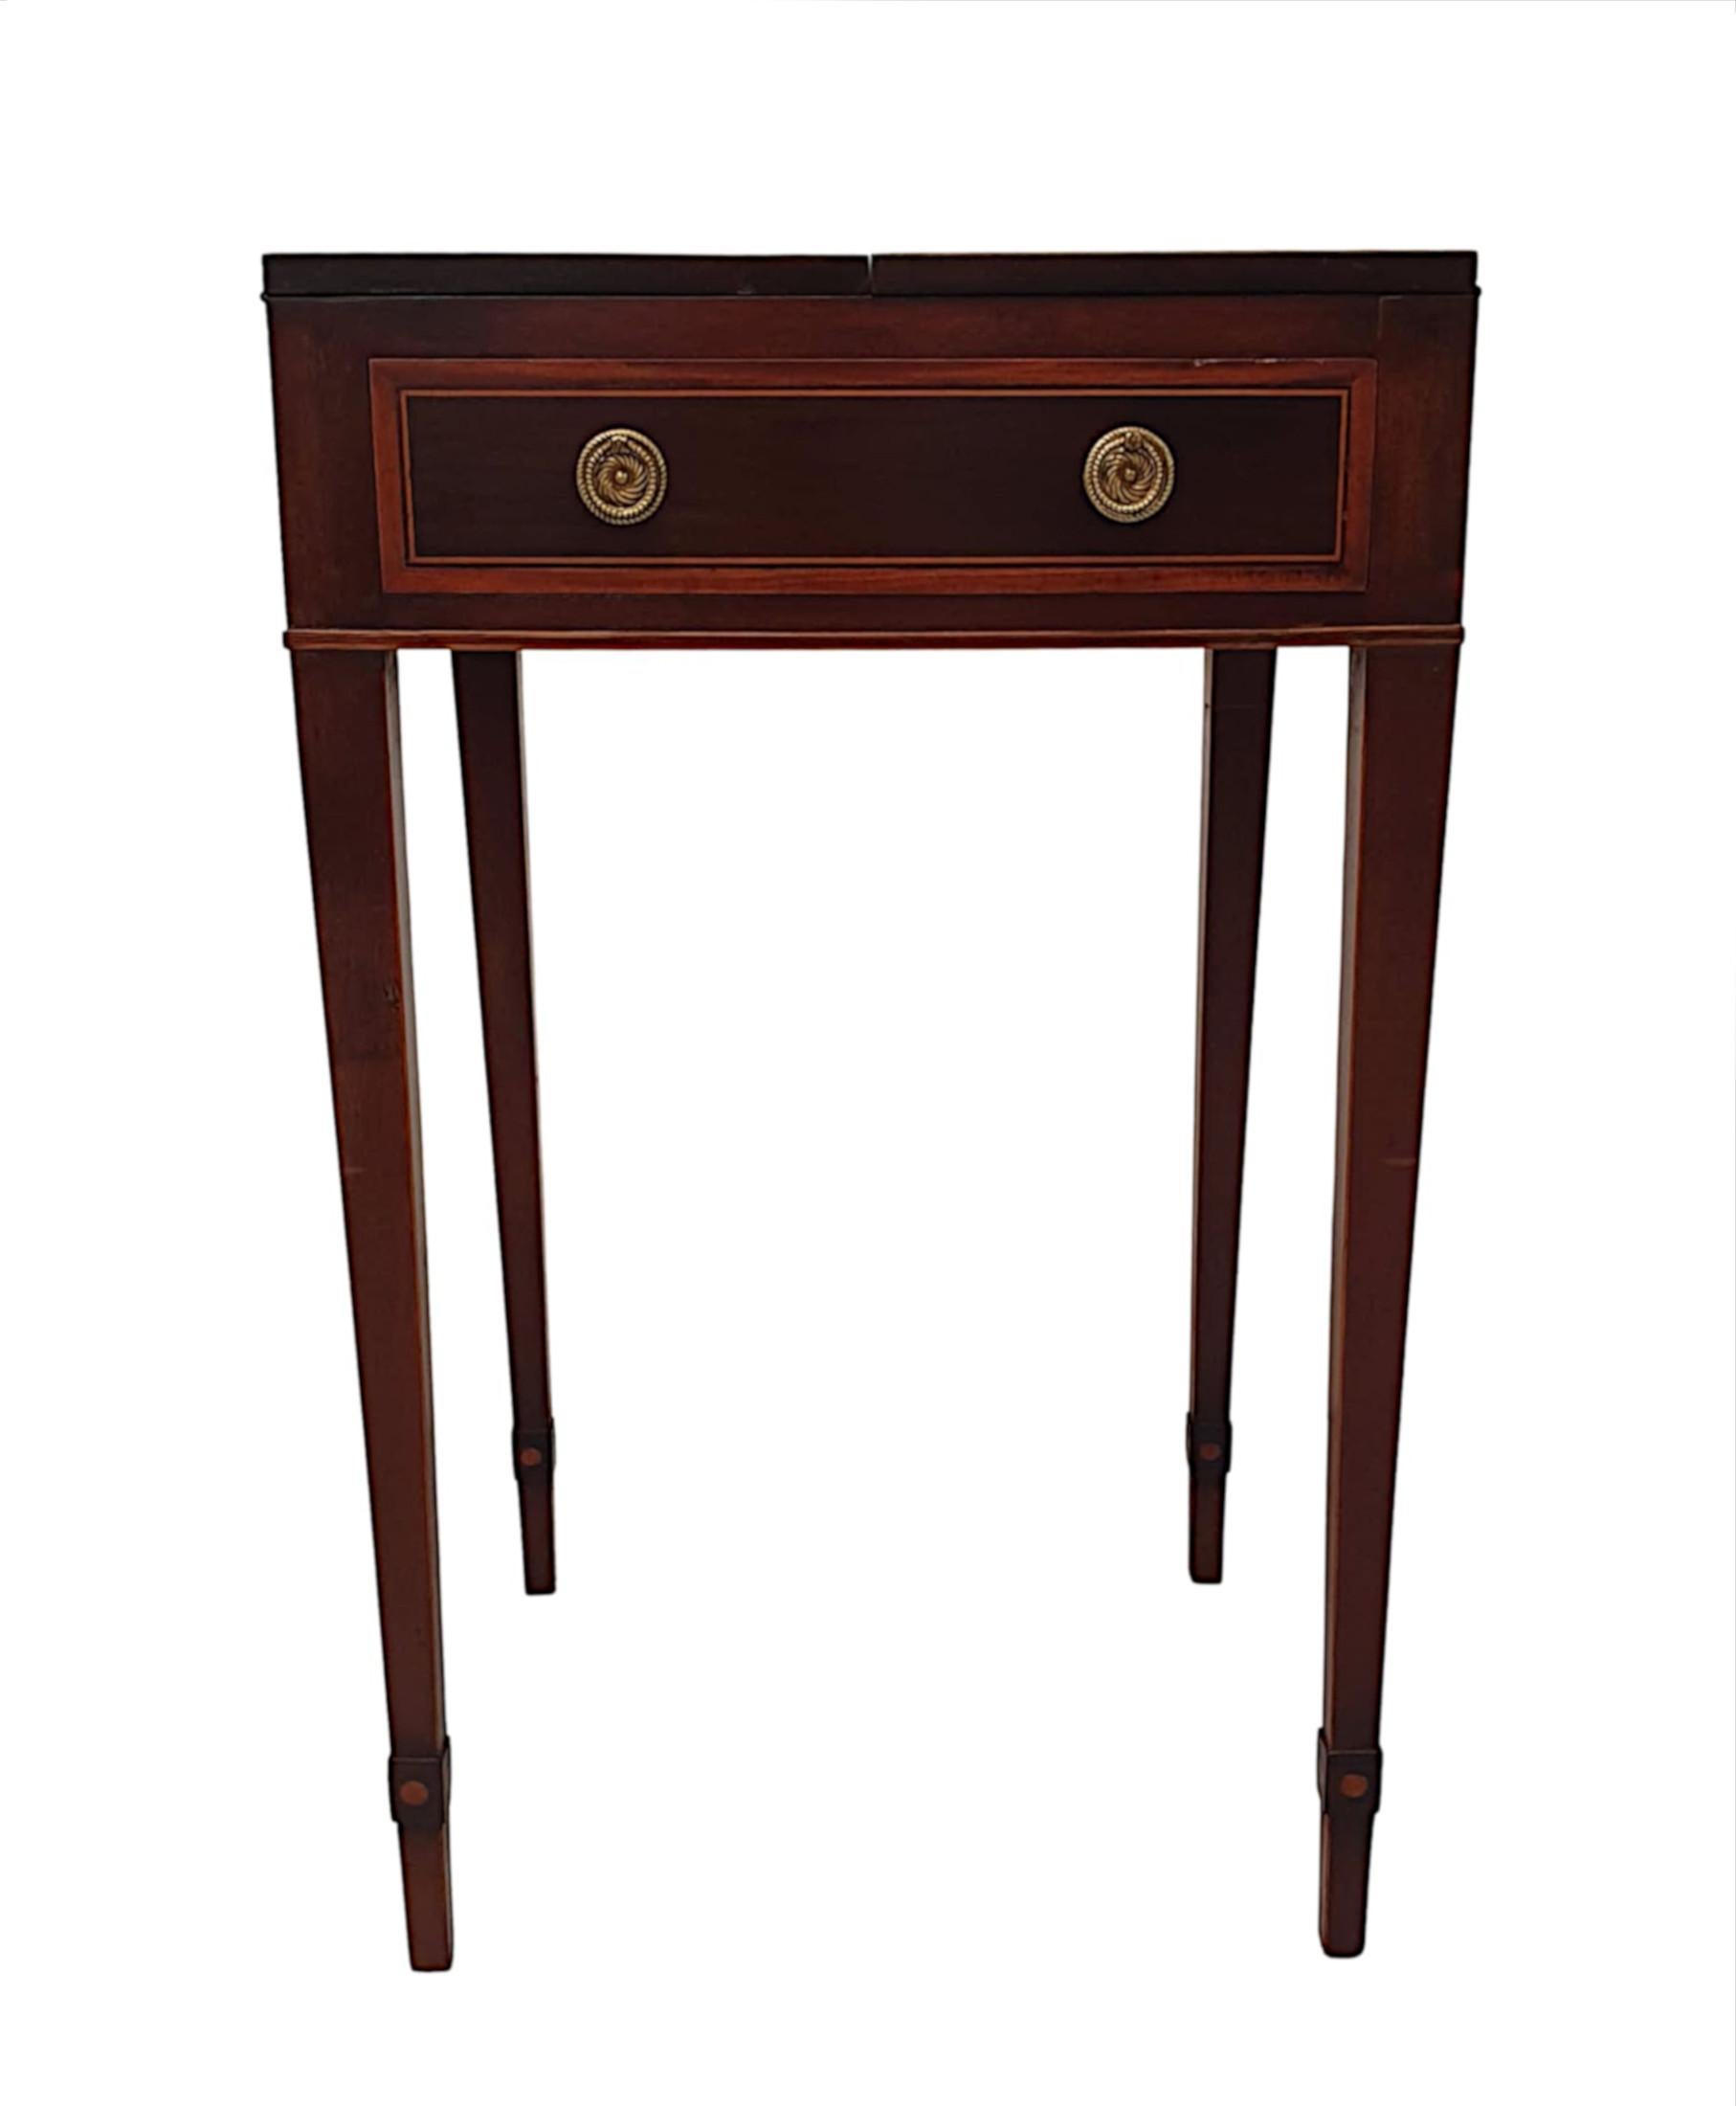 English Fabulous Early 19th Century Regency Inlaid Card Table For Sale